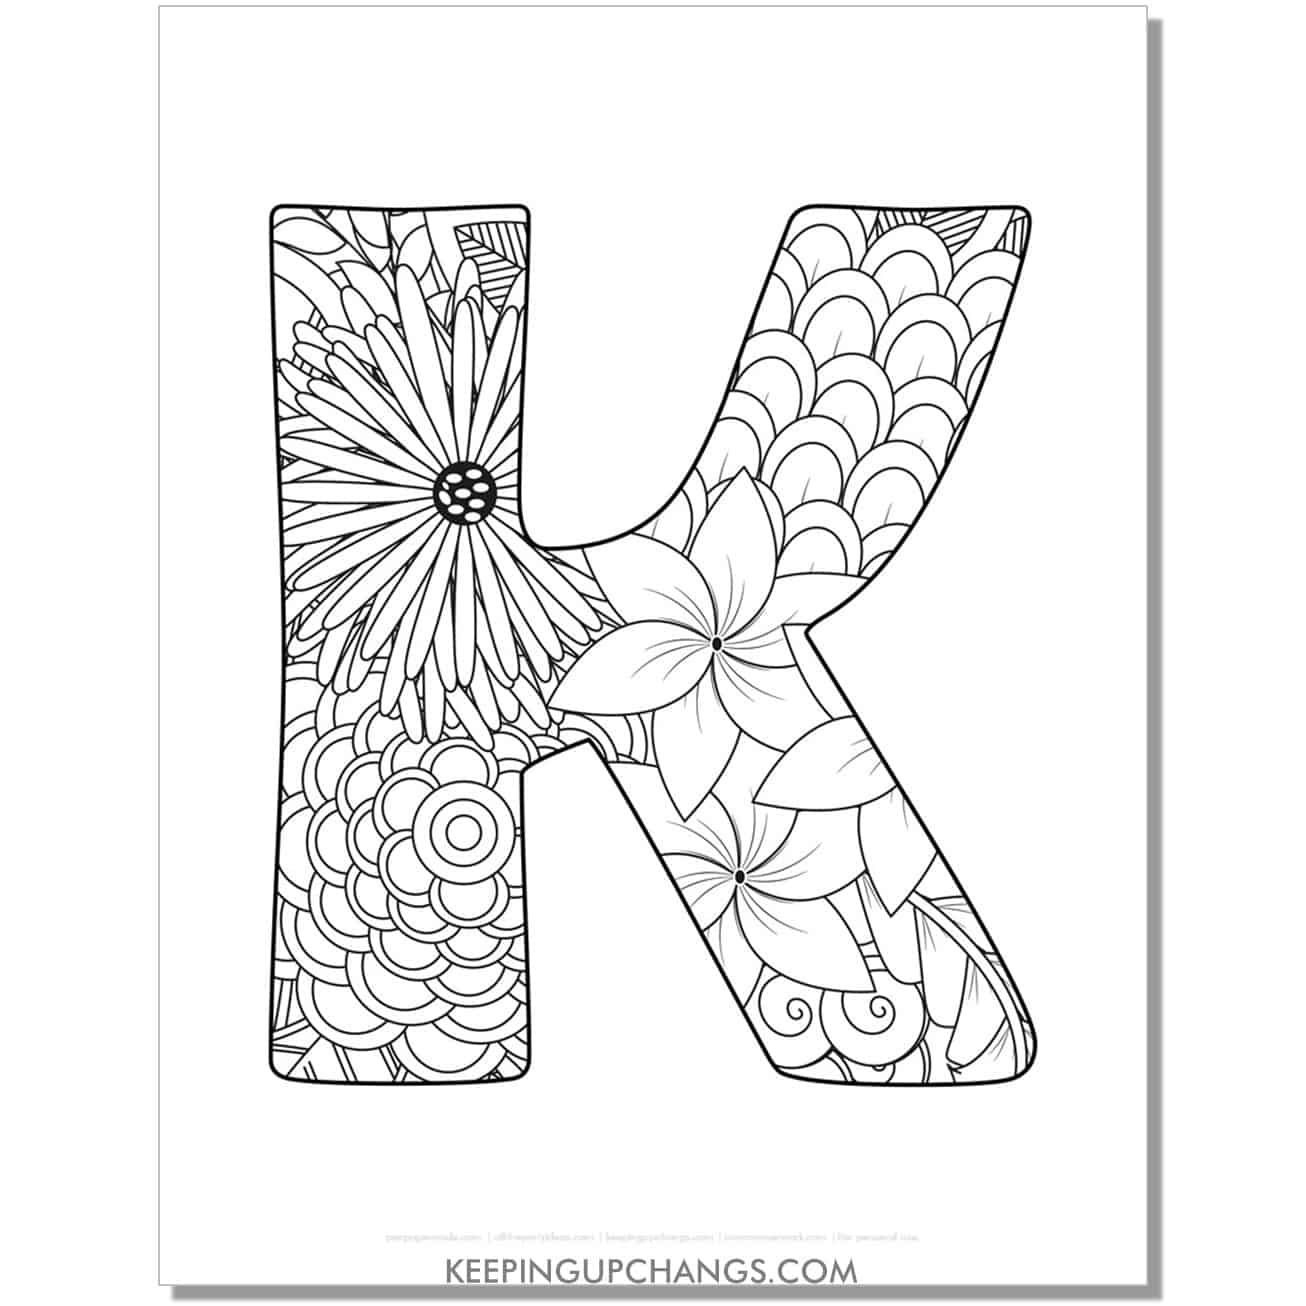 free letter k to color, complex mandala zentangle for adults.